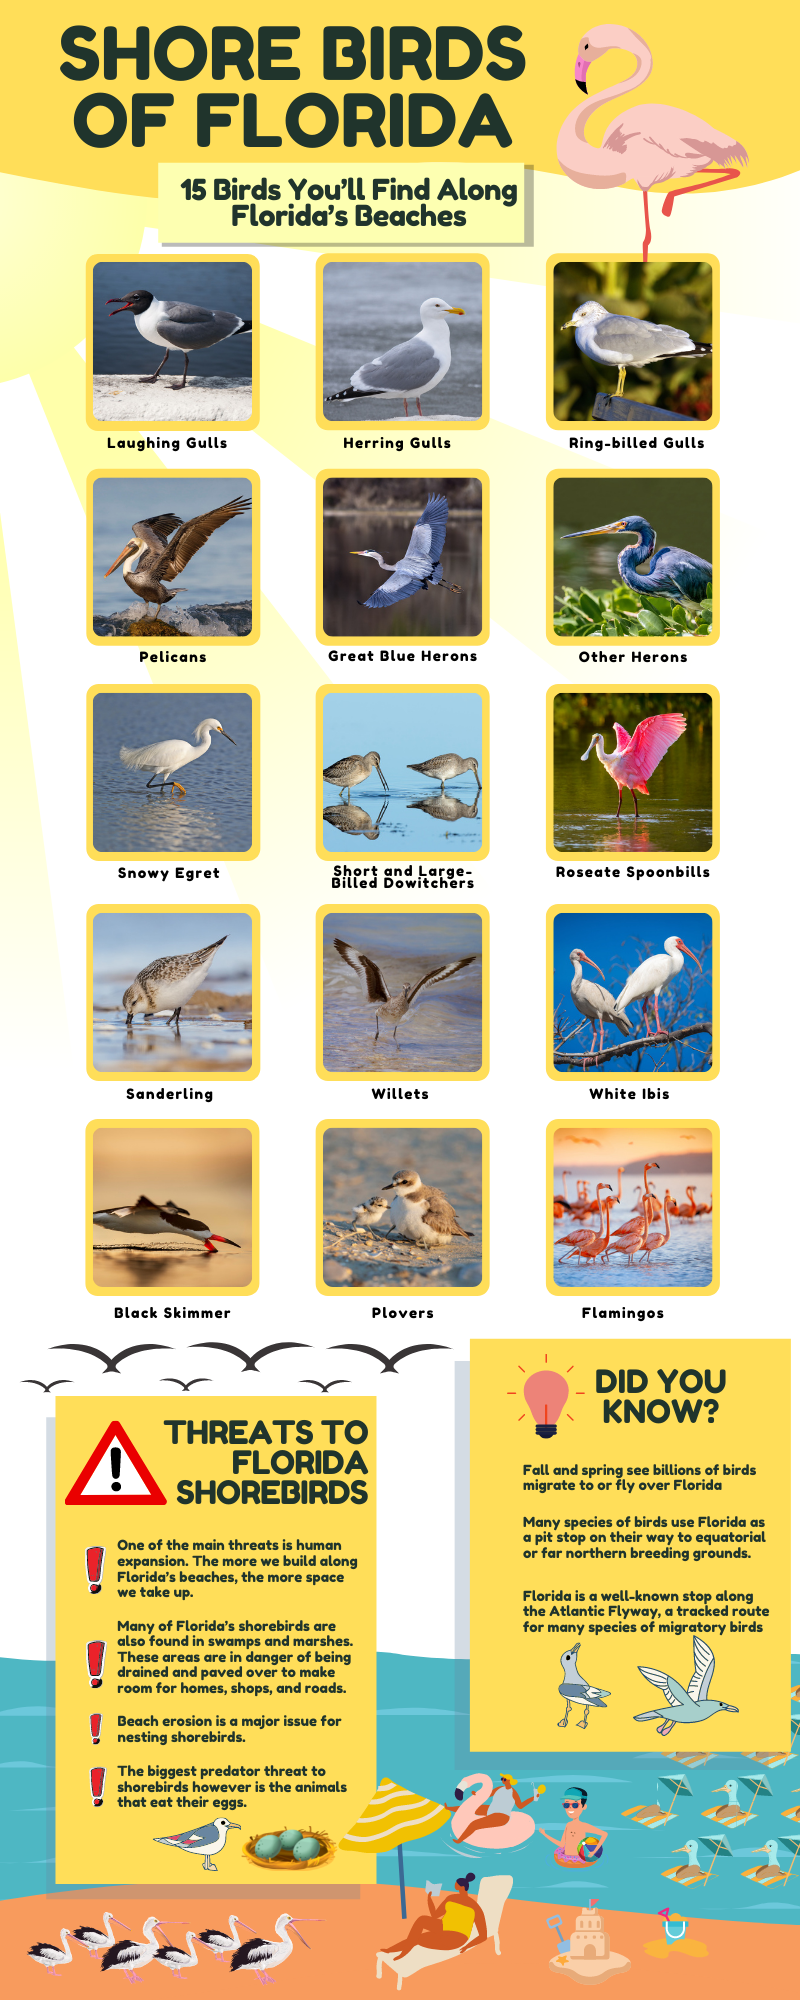 Shore birds of florida chart with facts about threats to Florida seabirds and other fun facts